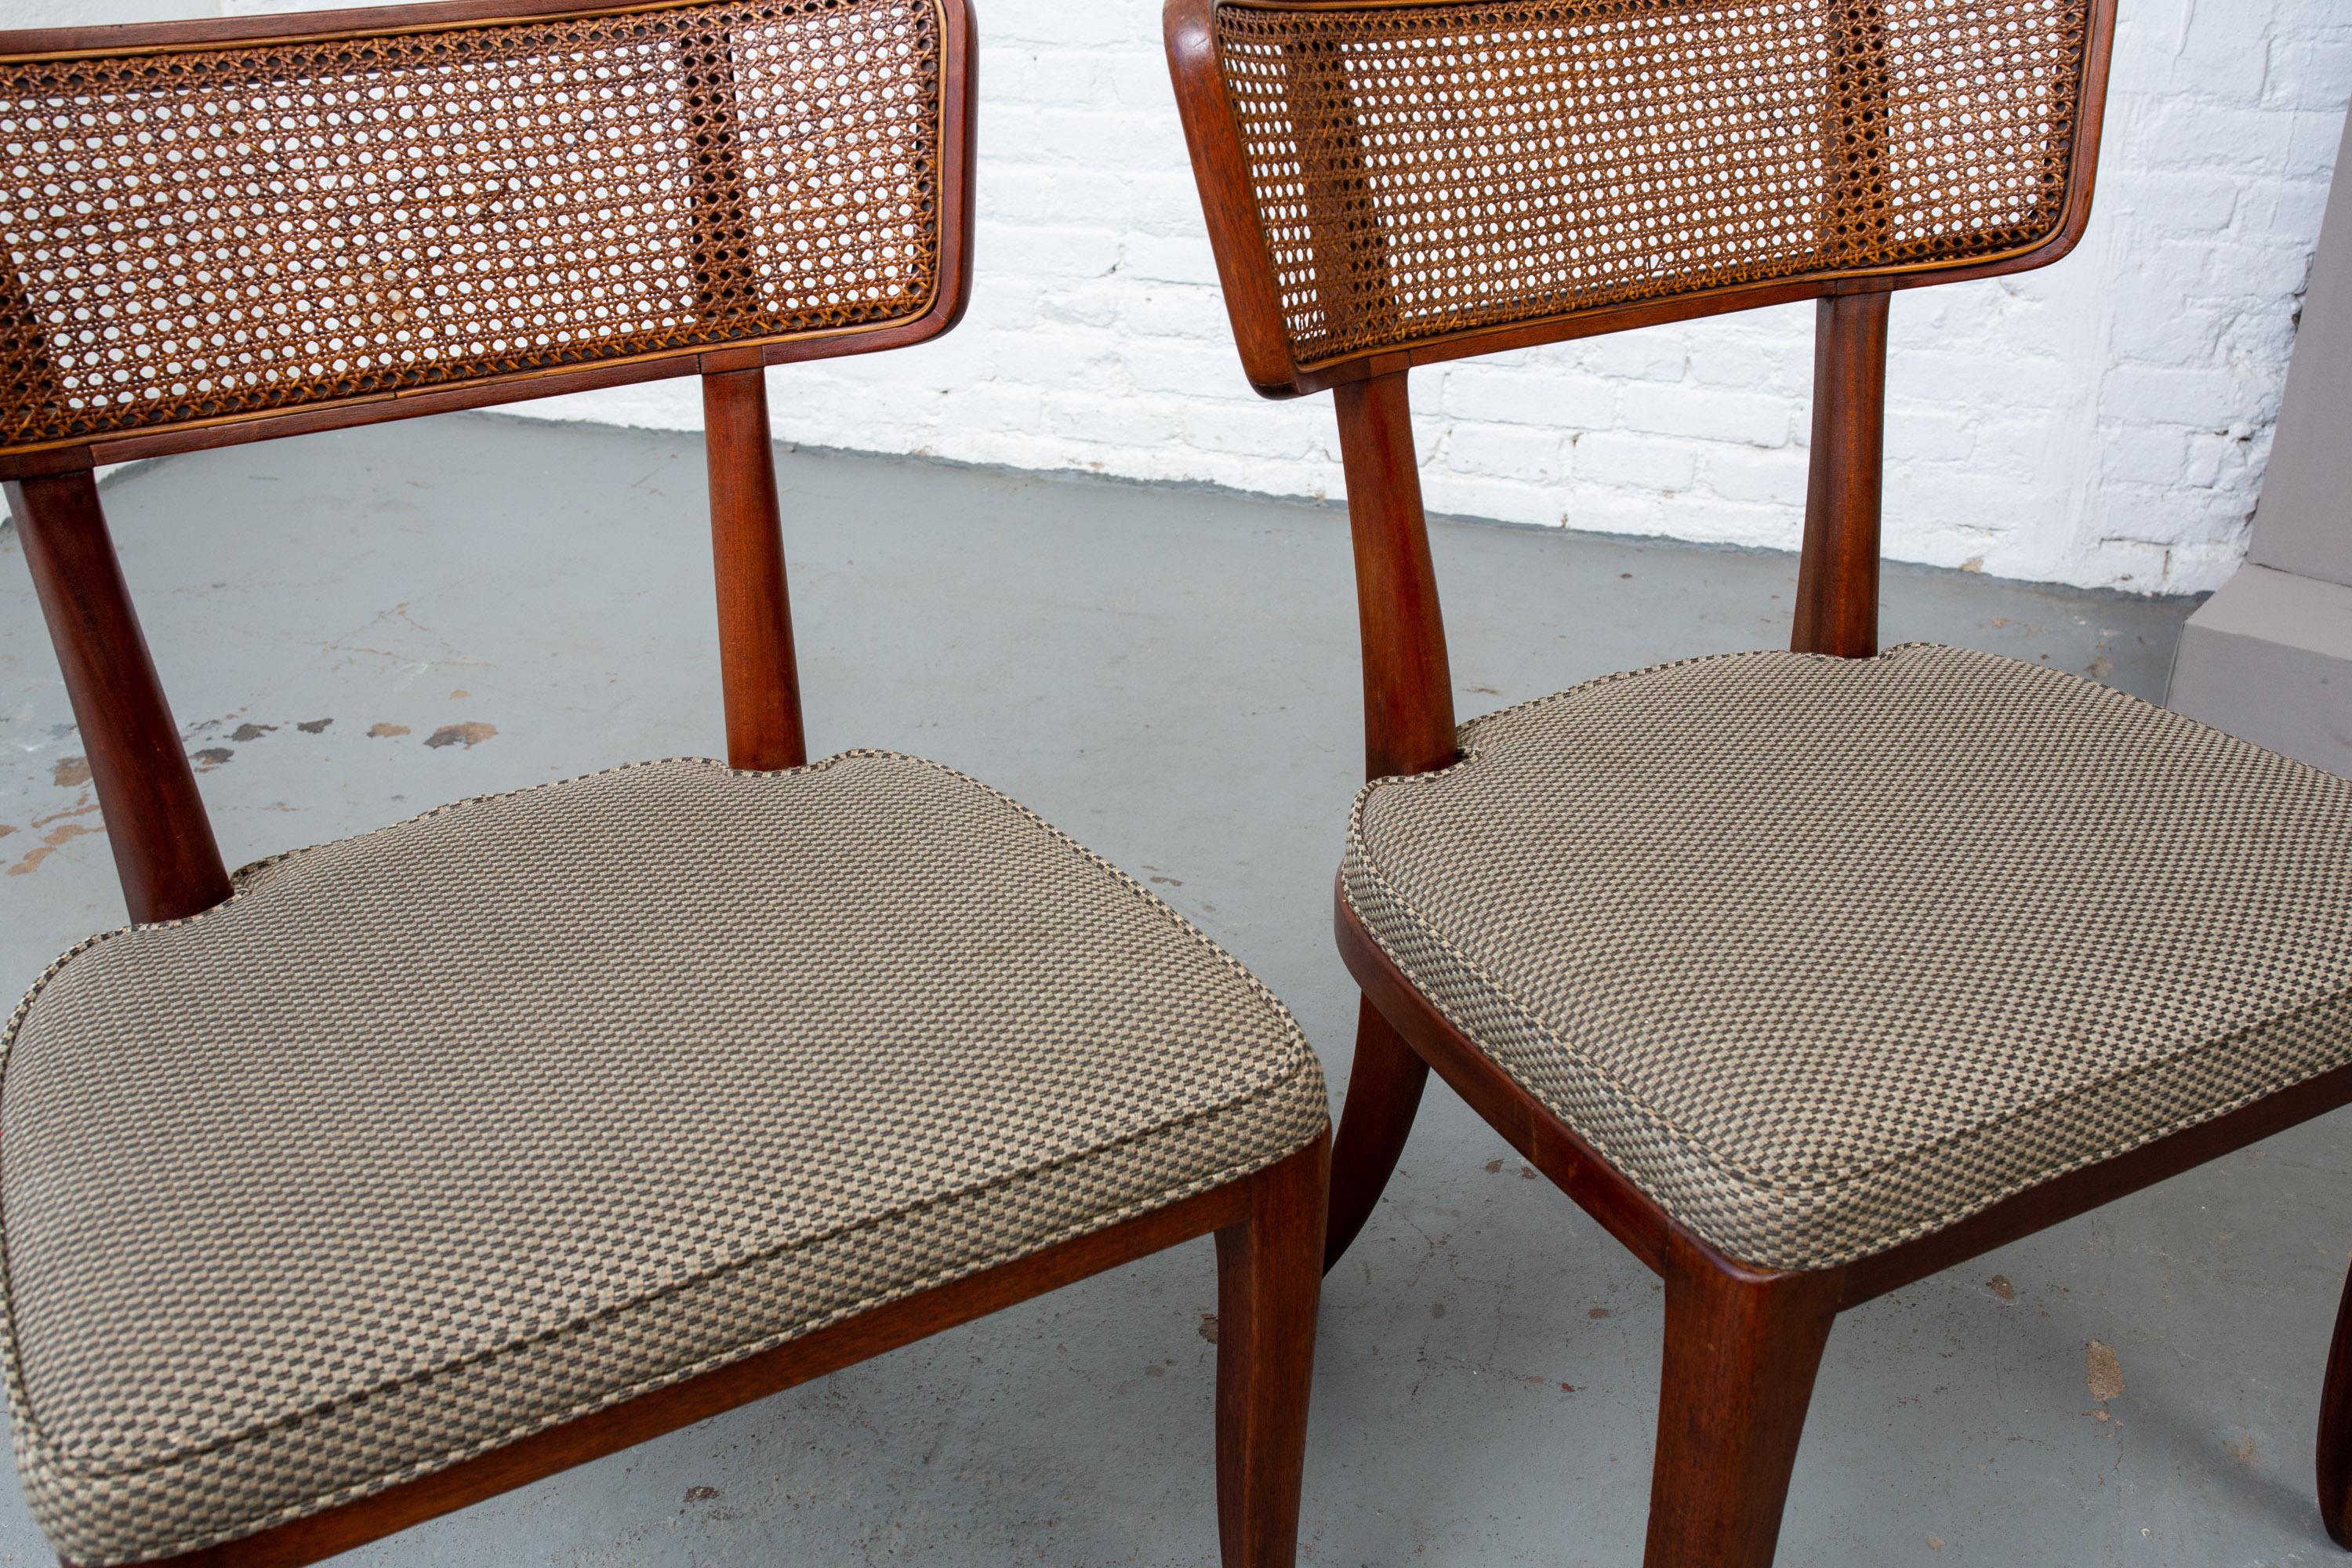 Pair of Mid-Century Modern cane back side chairs with splayed legs in espresso brown. Original upholstery with cane in good condition. Wide back and seat make for a very comfortable chair.